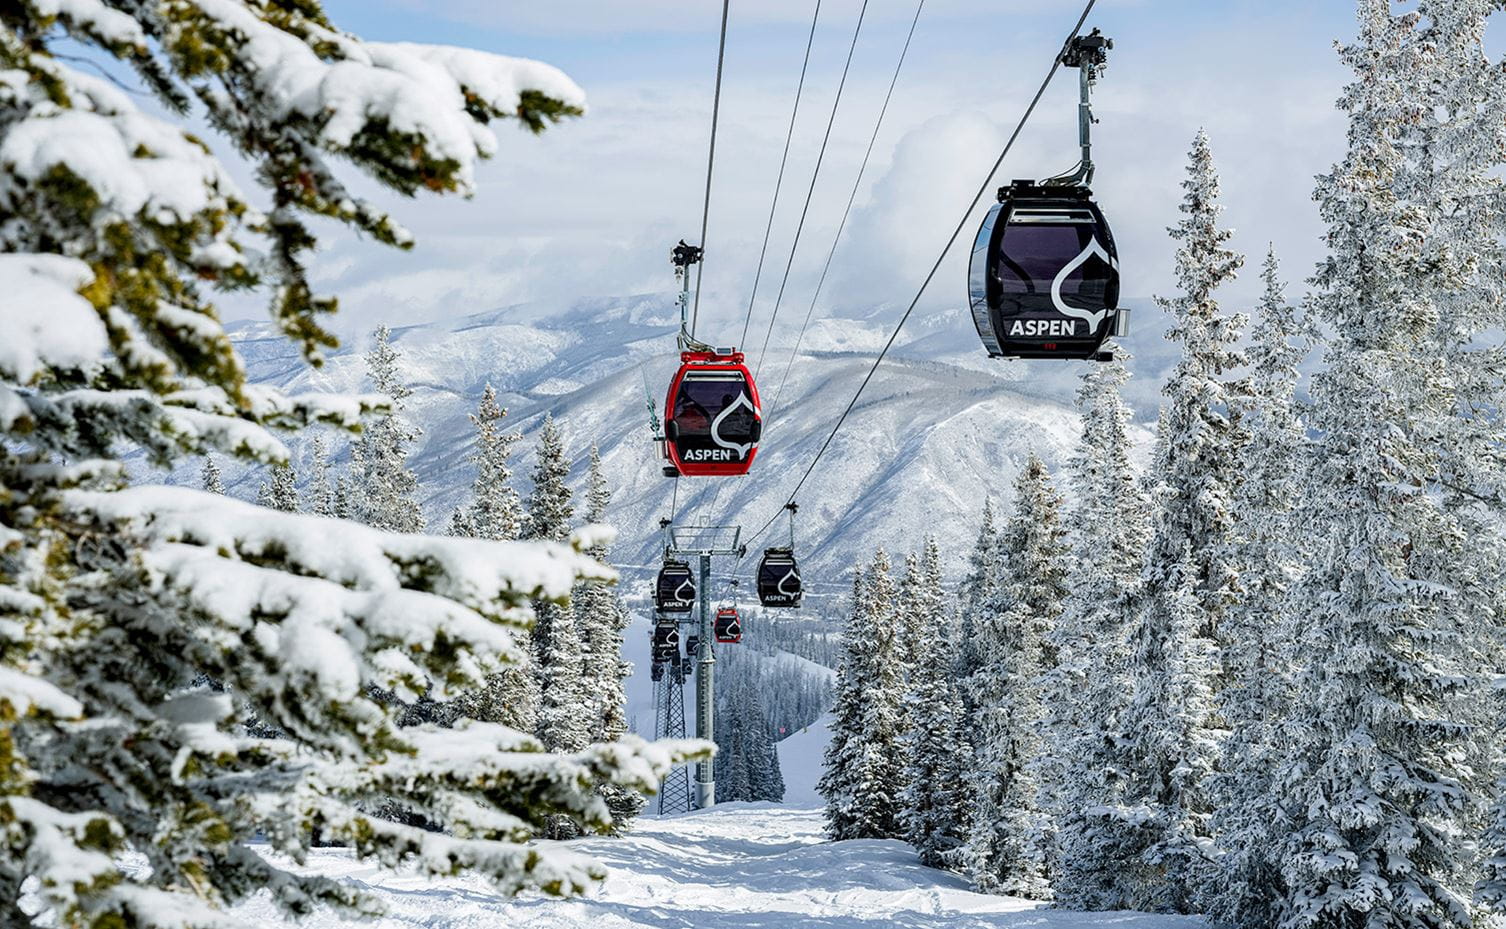 Silver Queen Gondola during the height of winter